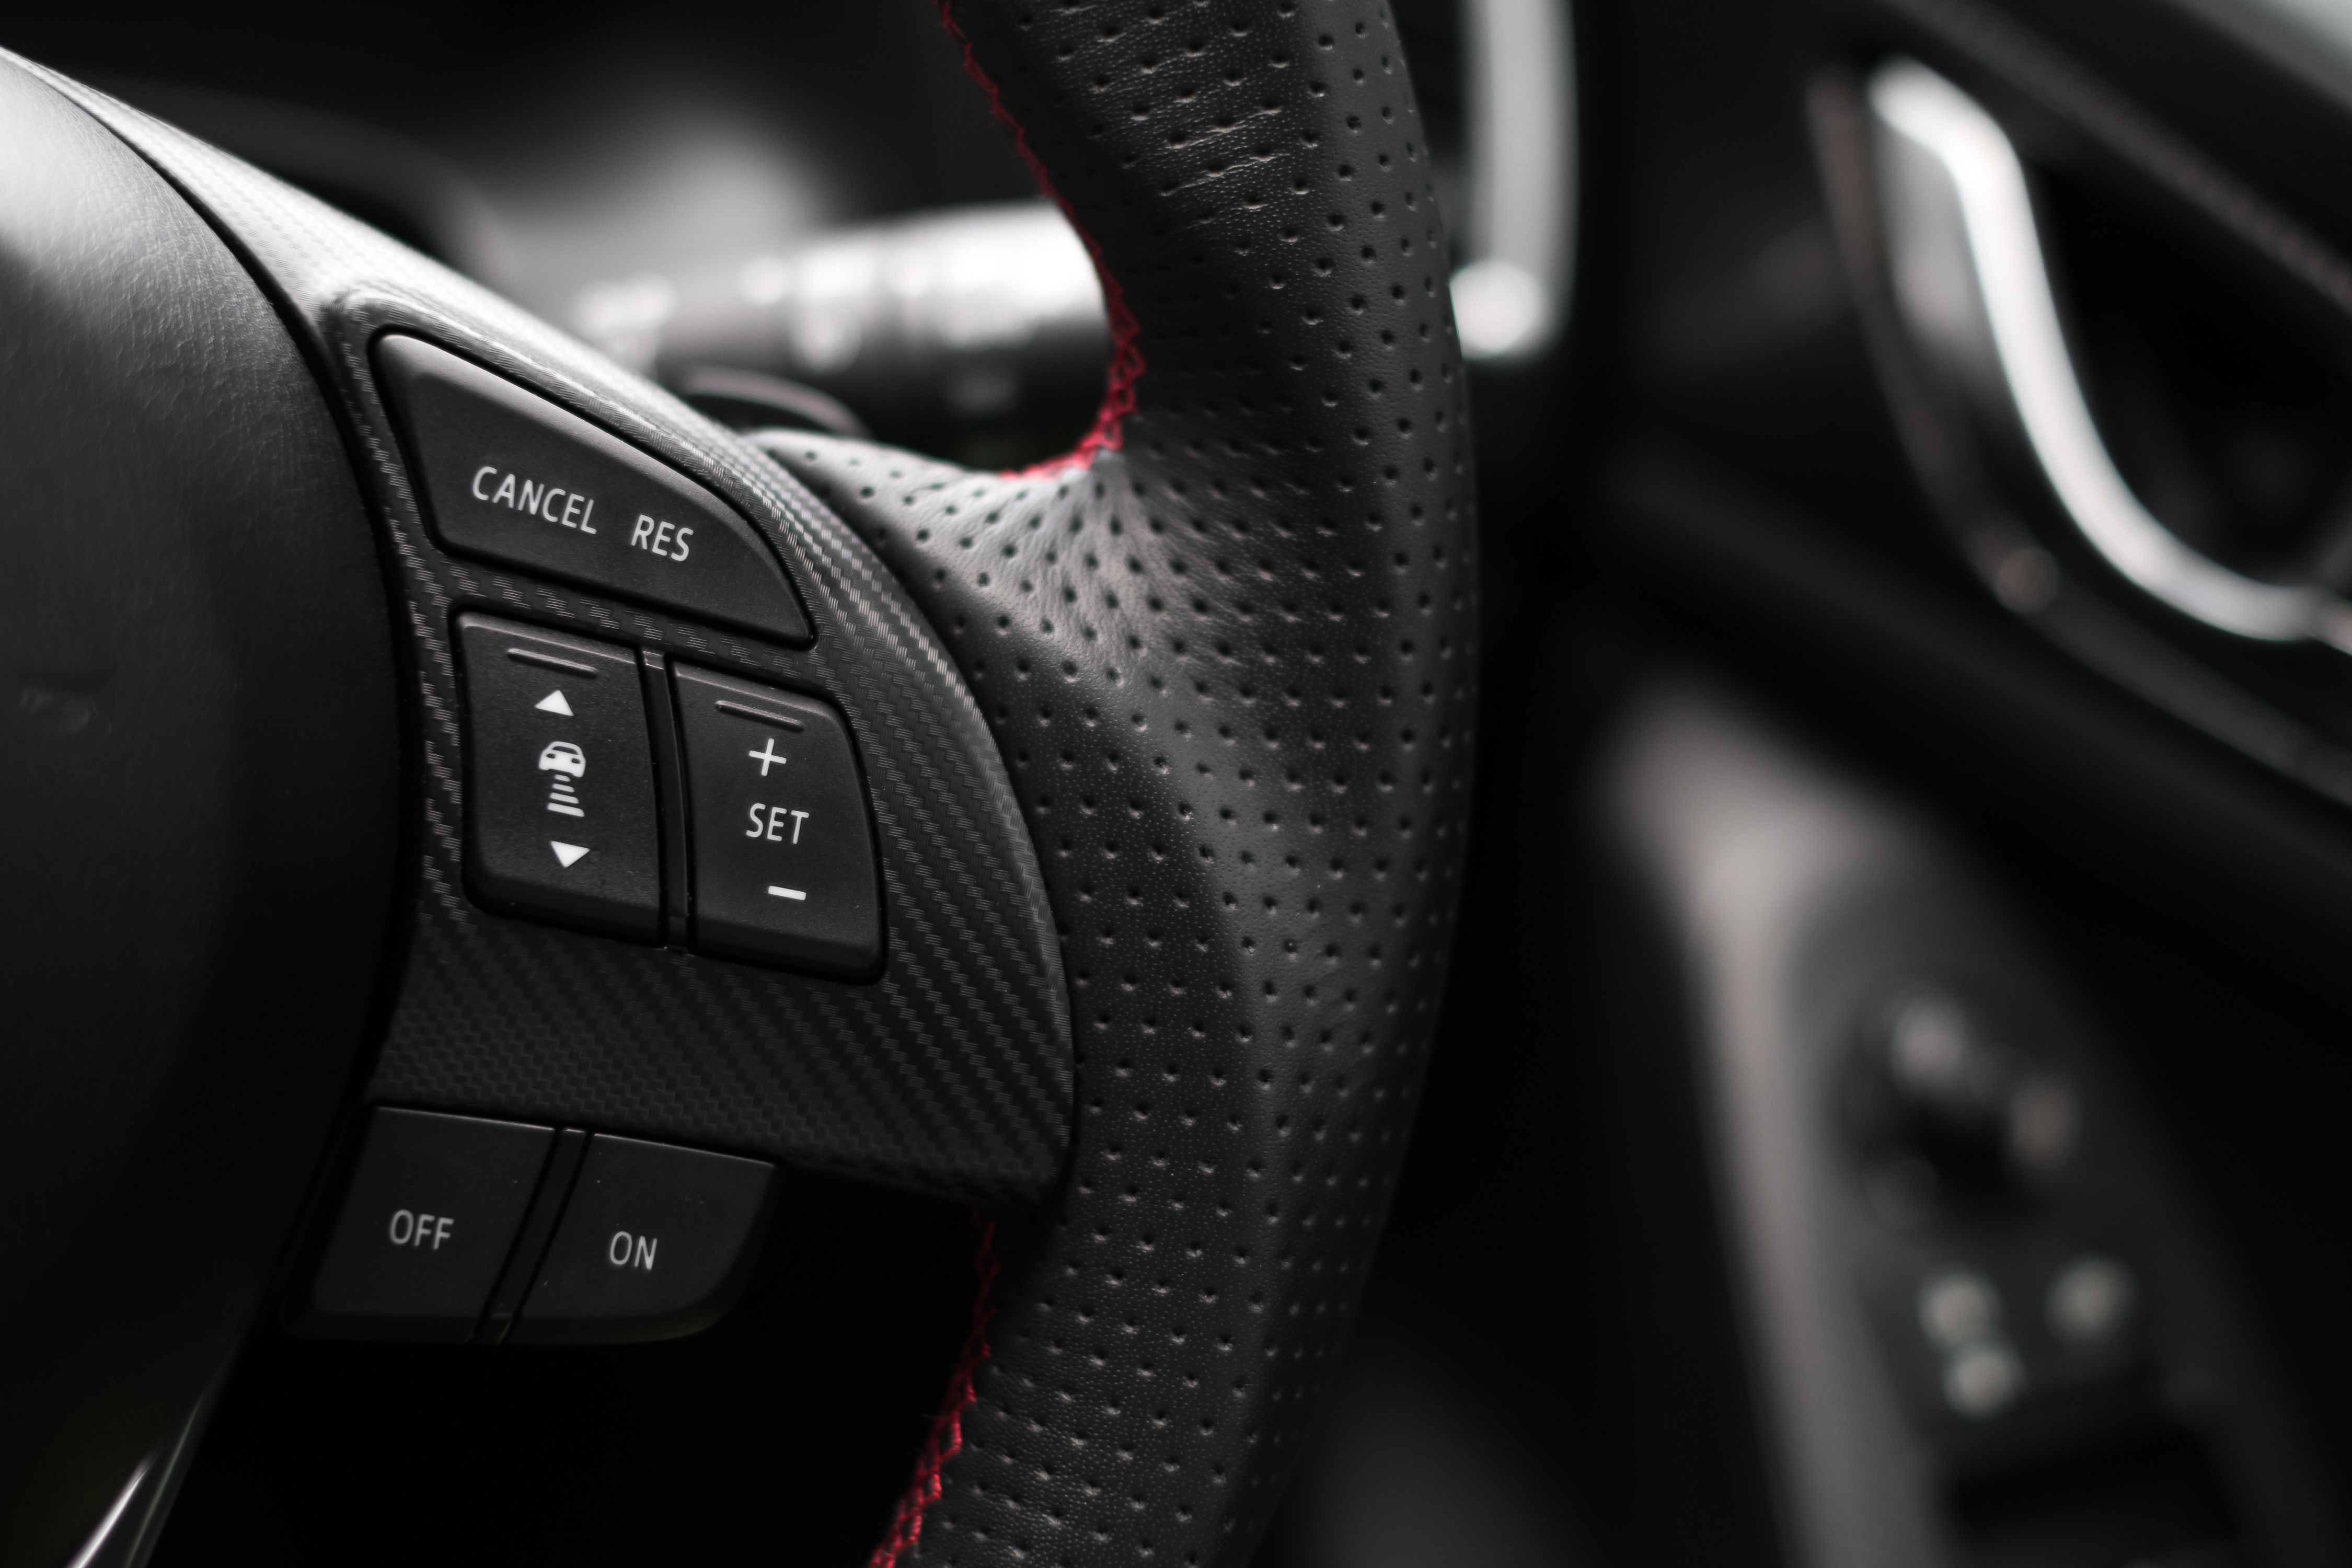 How Much Does It Cost to Install Aftermarket Cruise Control?